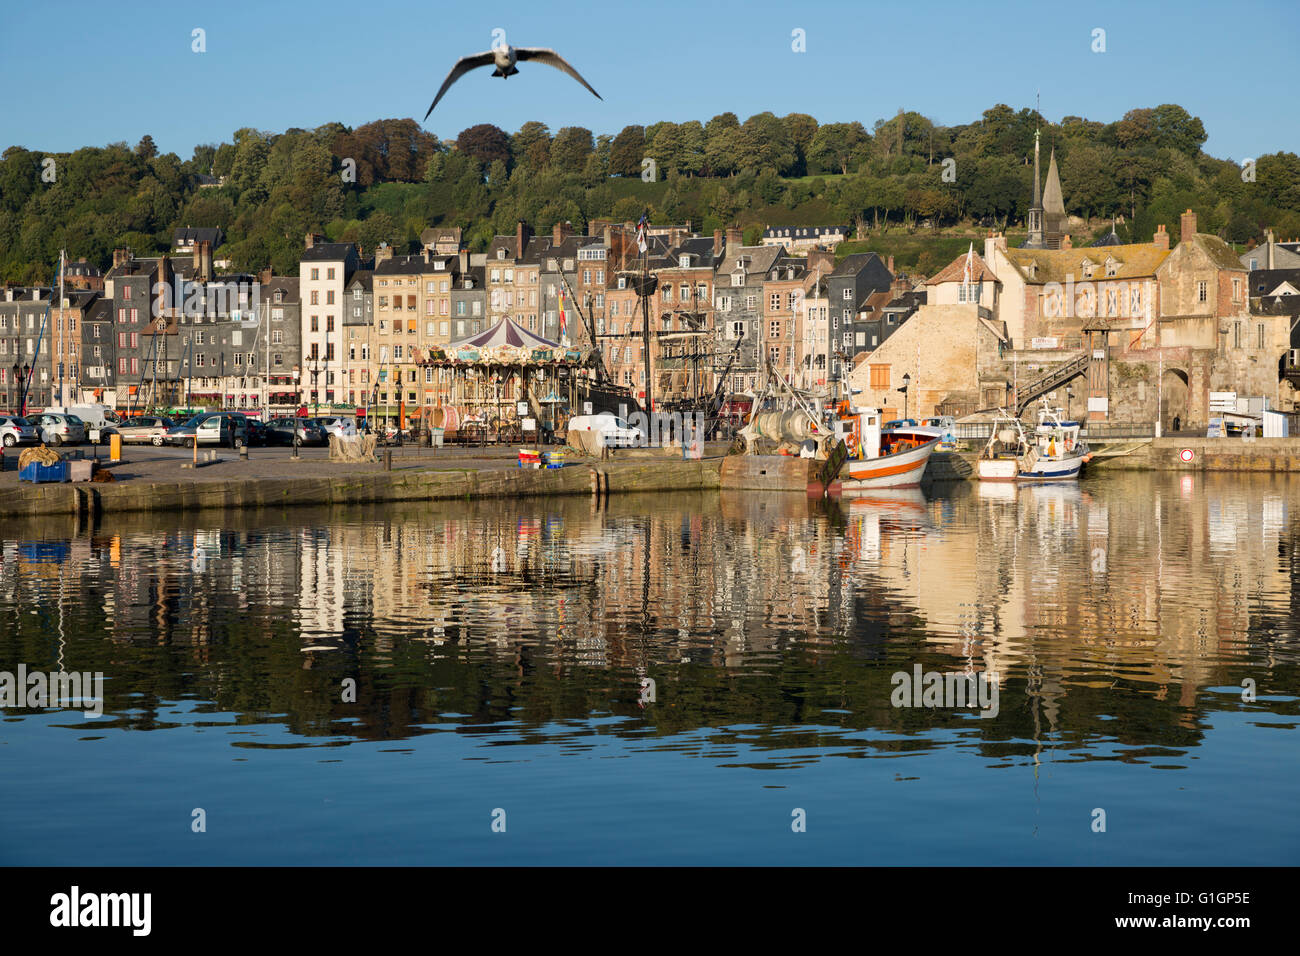 Saint Catherine Quay in the Vieux Bassin viewed from Avant Port, Honfleur, Normandy, France, Europe Stock Photo